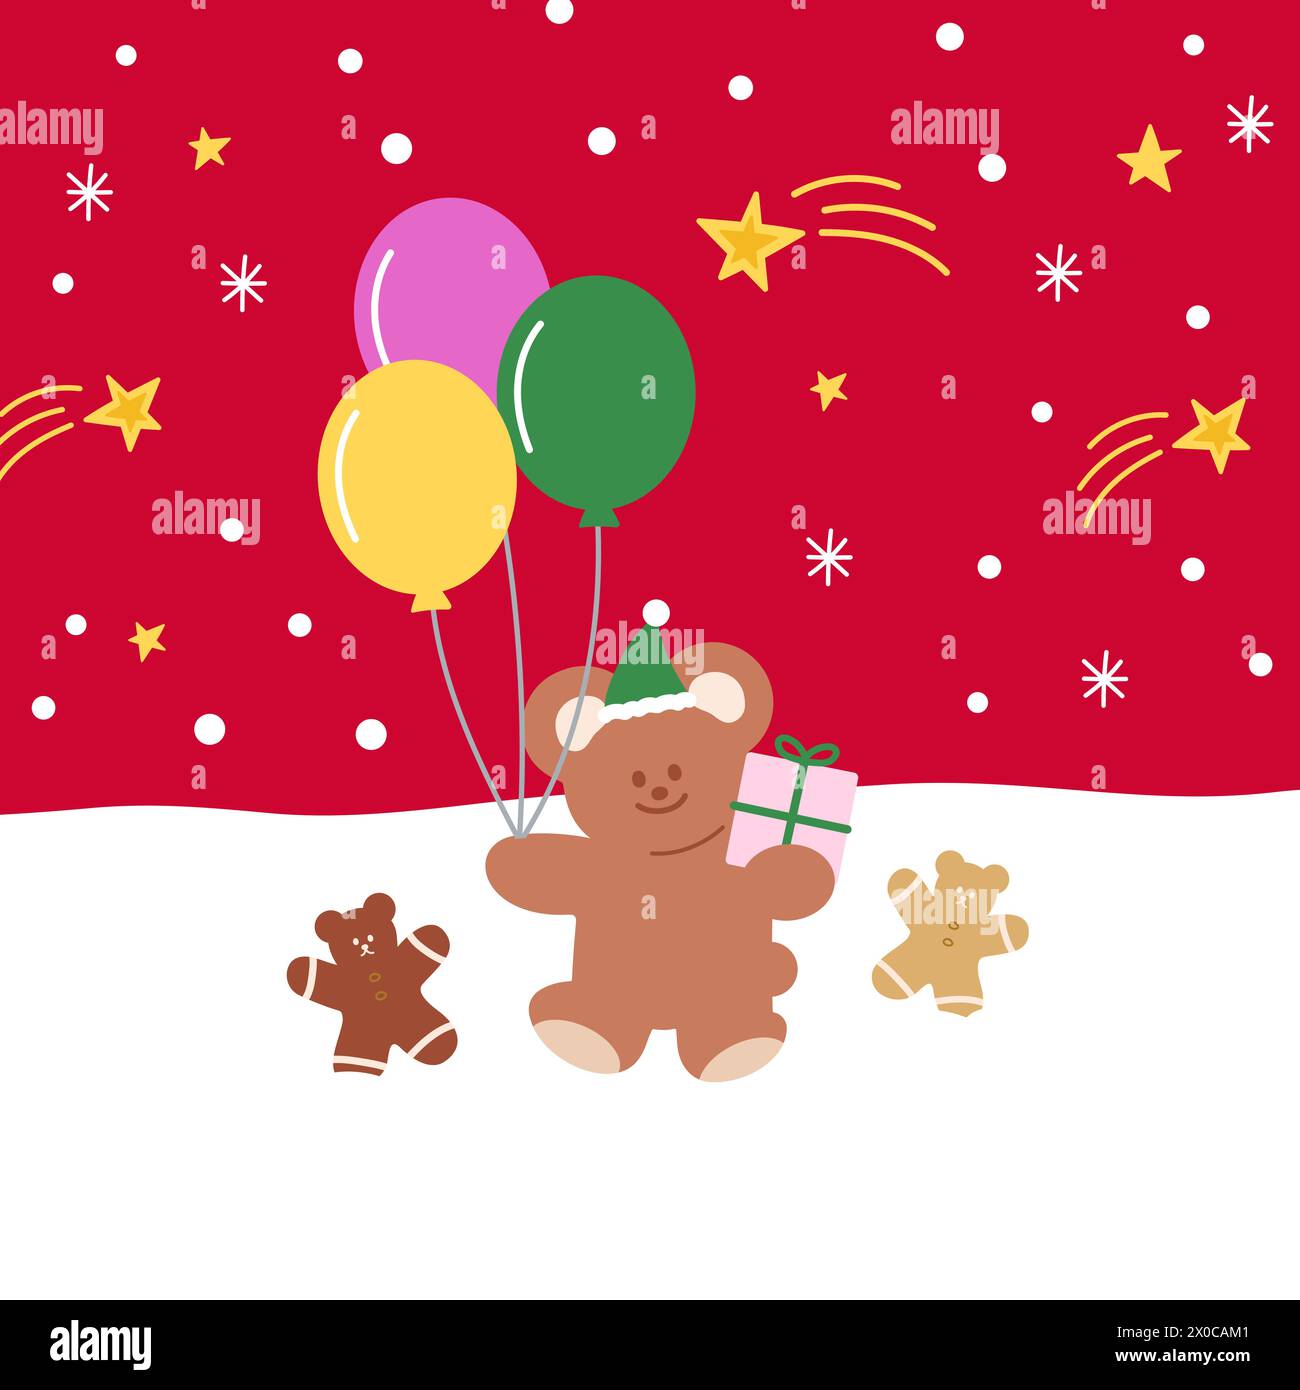 Christmas and New Year illustrations of teddy bear, gingerbread man, snow, balloons, gift box on a red background for card, winter wallpaper, backdrop Stock Vector